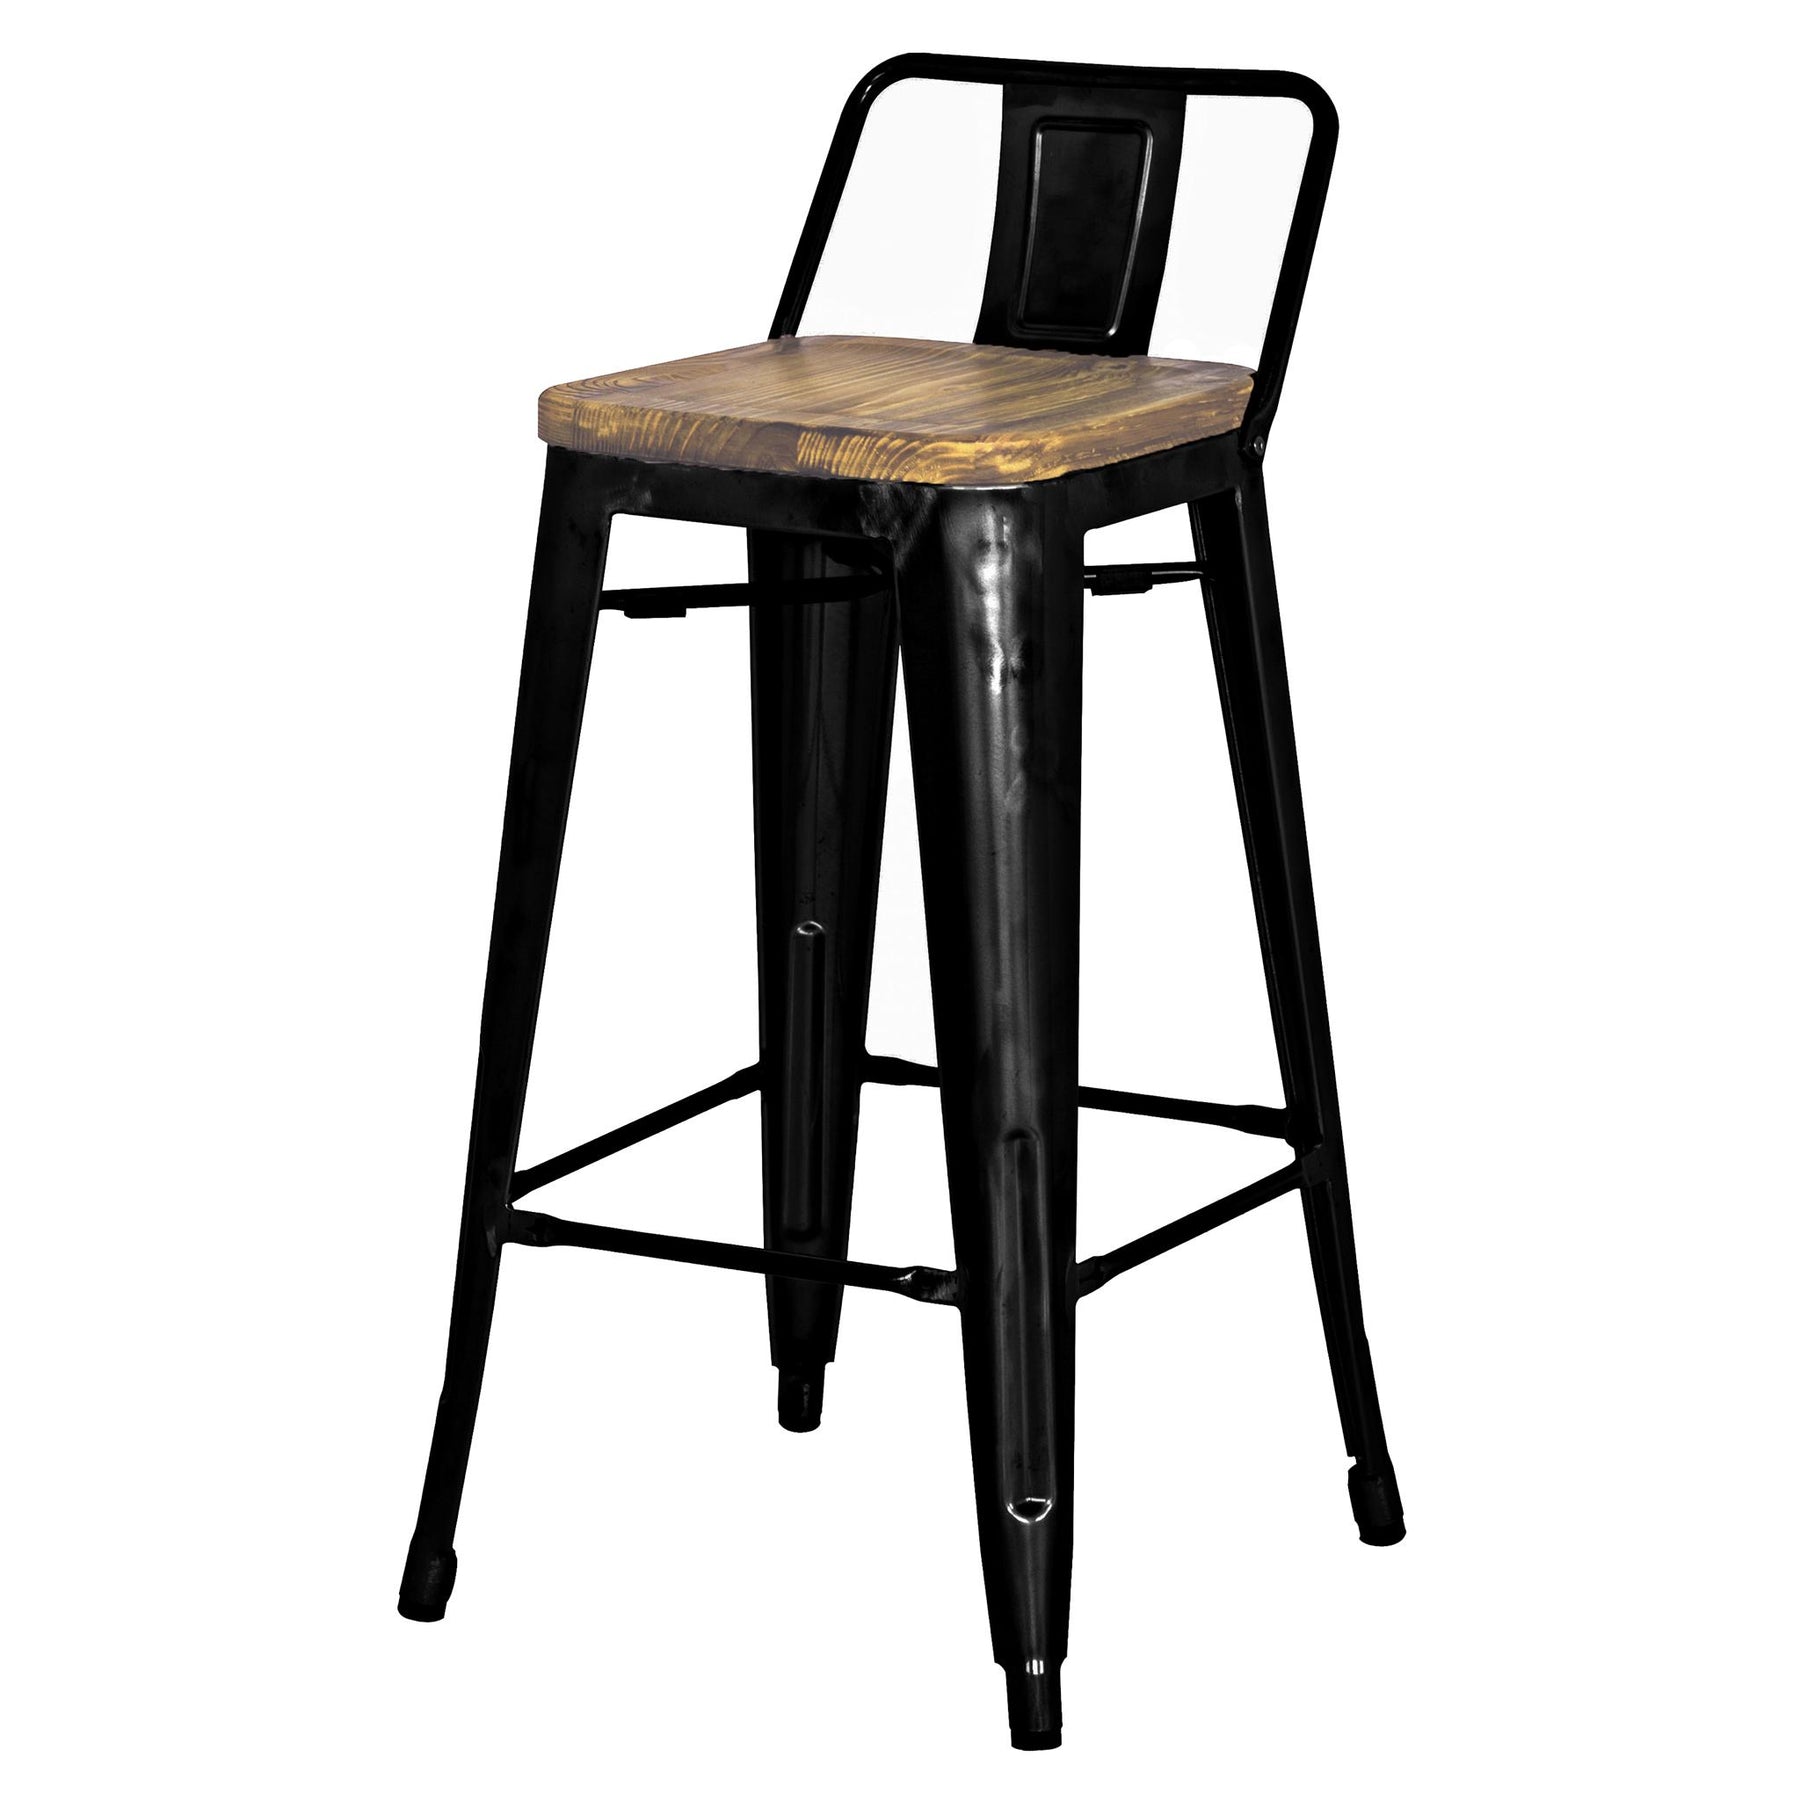 Metropolis Low Back Bar Stool (Set of 4) by New Pacific Direct - 938537